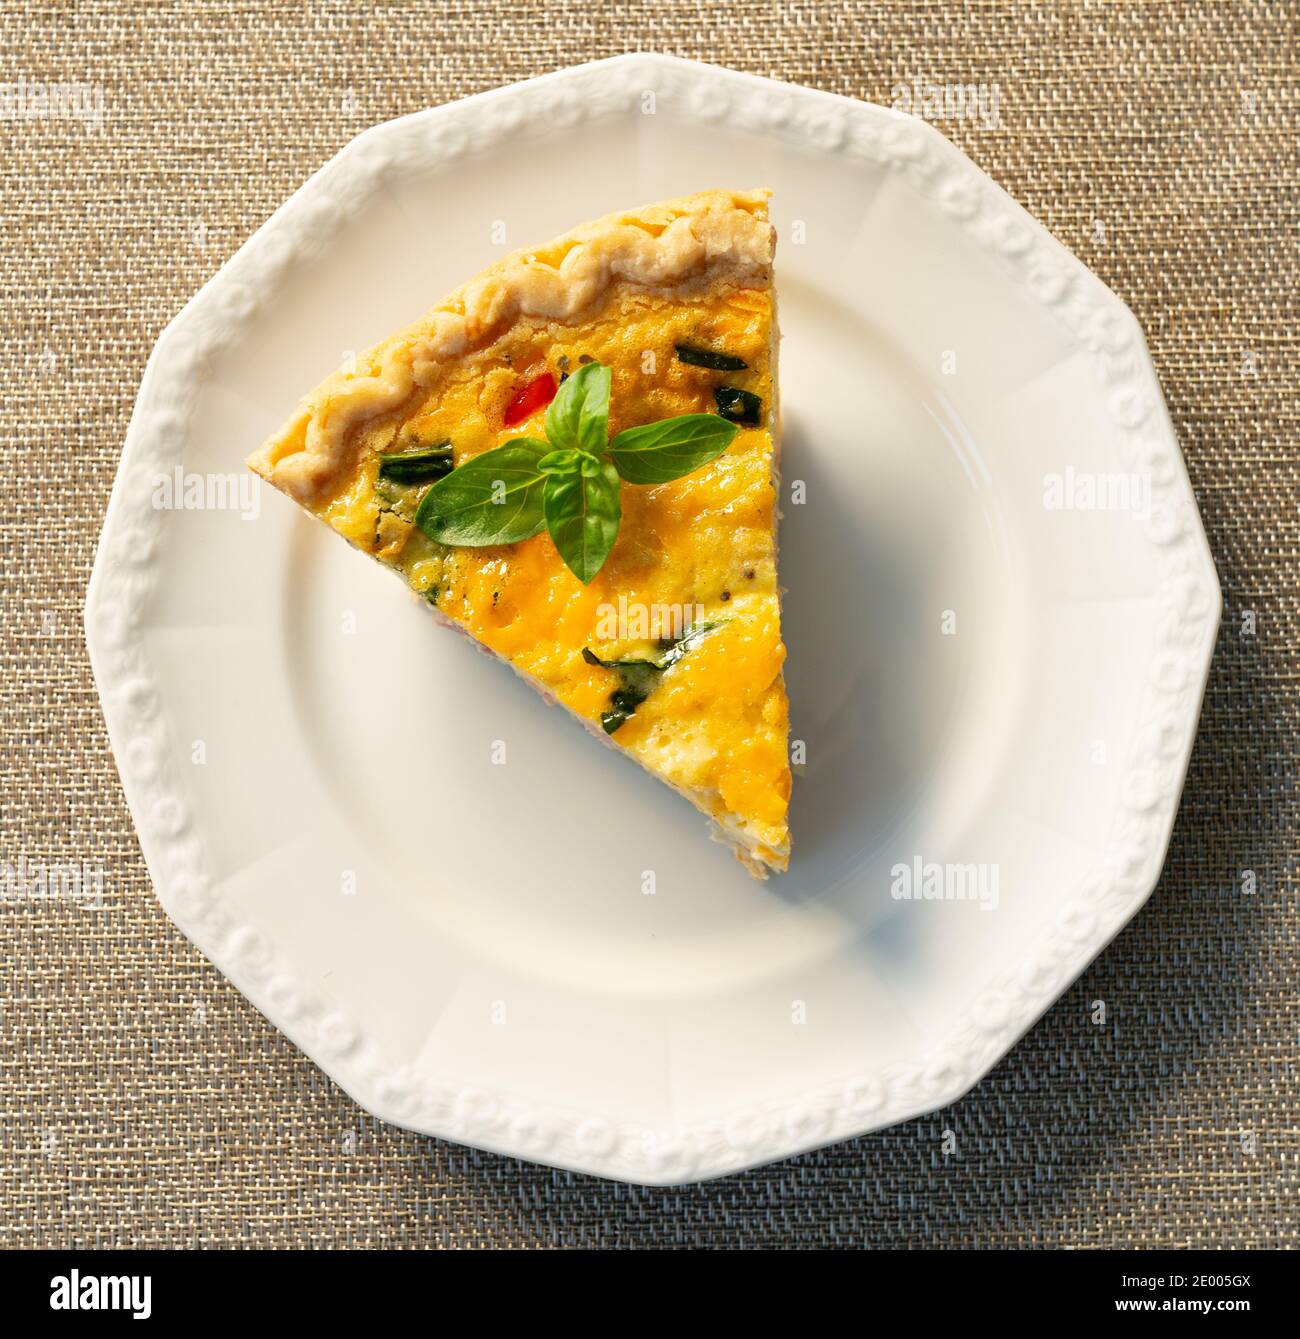 Horderves on plate stock image. Image of quiche, snack - 194643165